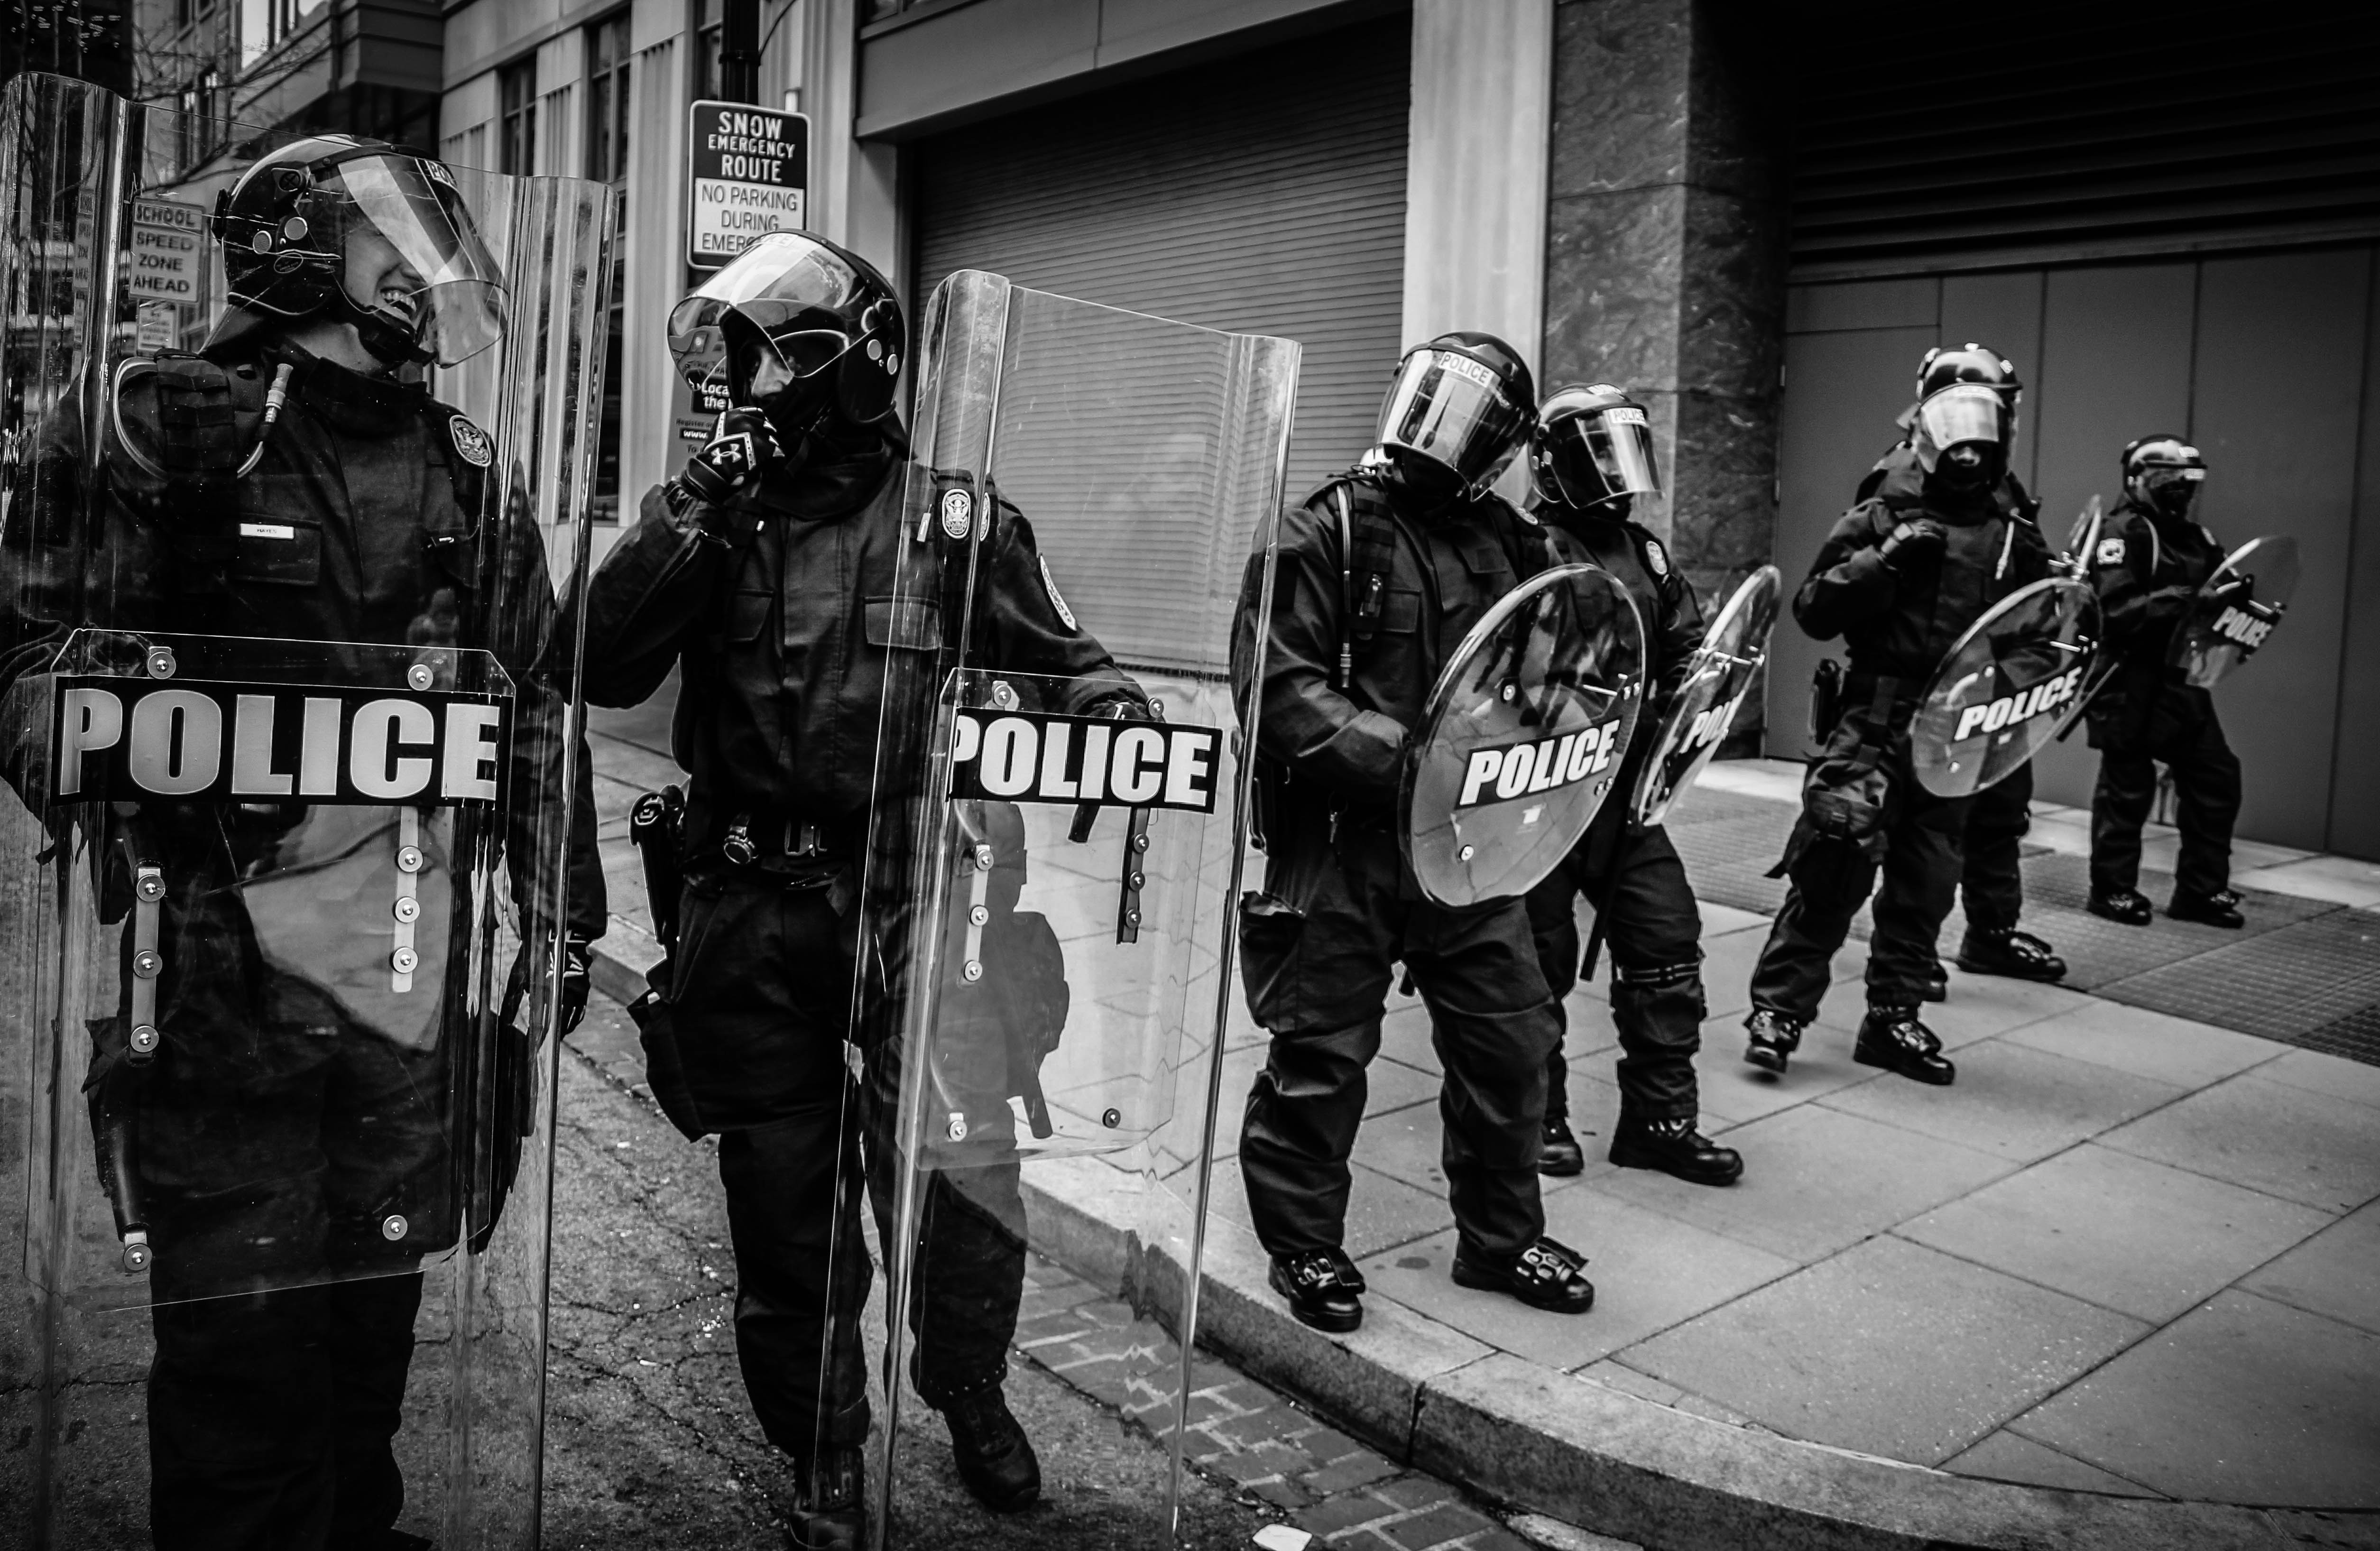 5018x3270 #officers, #group, #law, #manifest, #security system, #pavement, #protestor, #man, #protest, #police, #black and white, #riot gear, #street, #person, #ppe, #riot, #Creative Commons image, #security, #sidewalk, #shield, #uniform